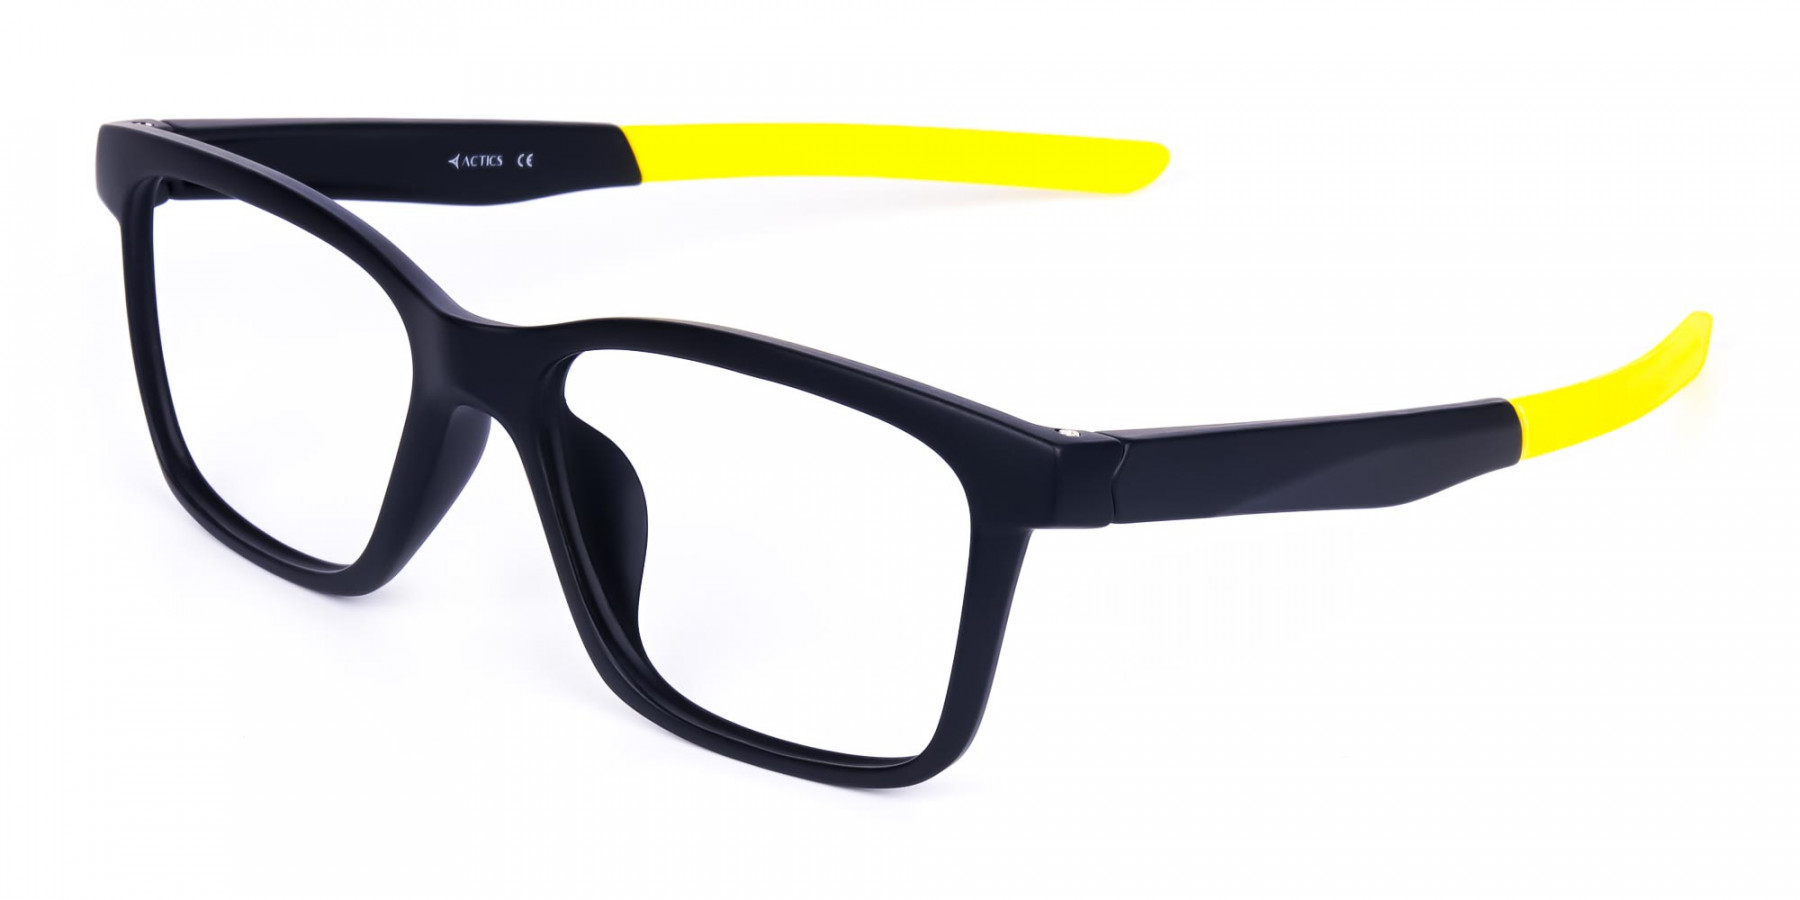 Black and Bright Yellow Cycling Glasses For Women In Rectangular Shape-1